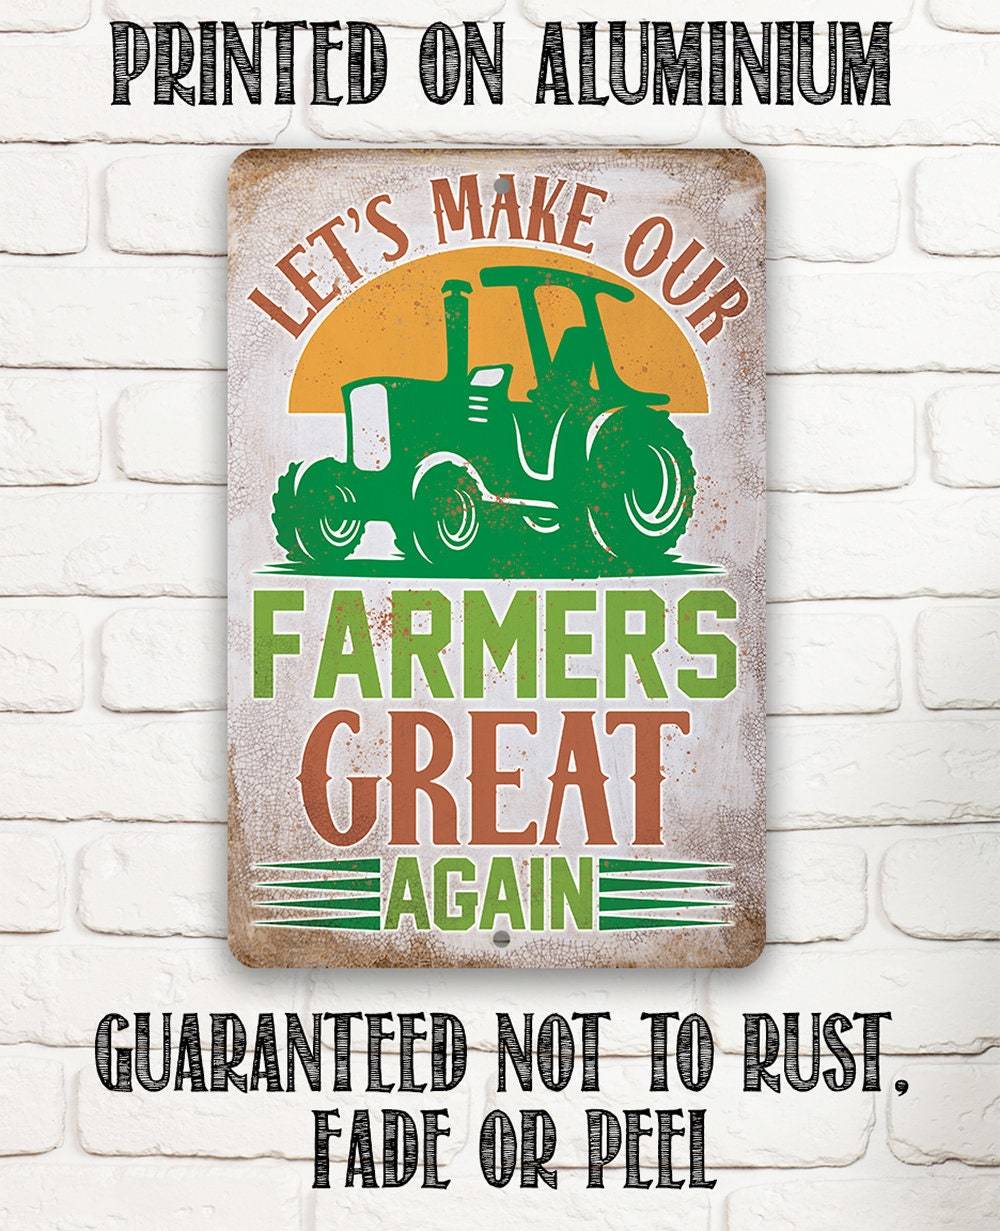 Let's Make Our Farmers Great Again - Metal Sign | Lone Star Art.